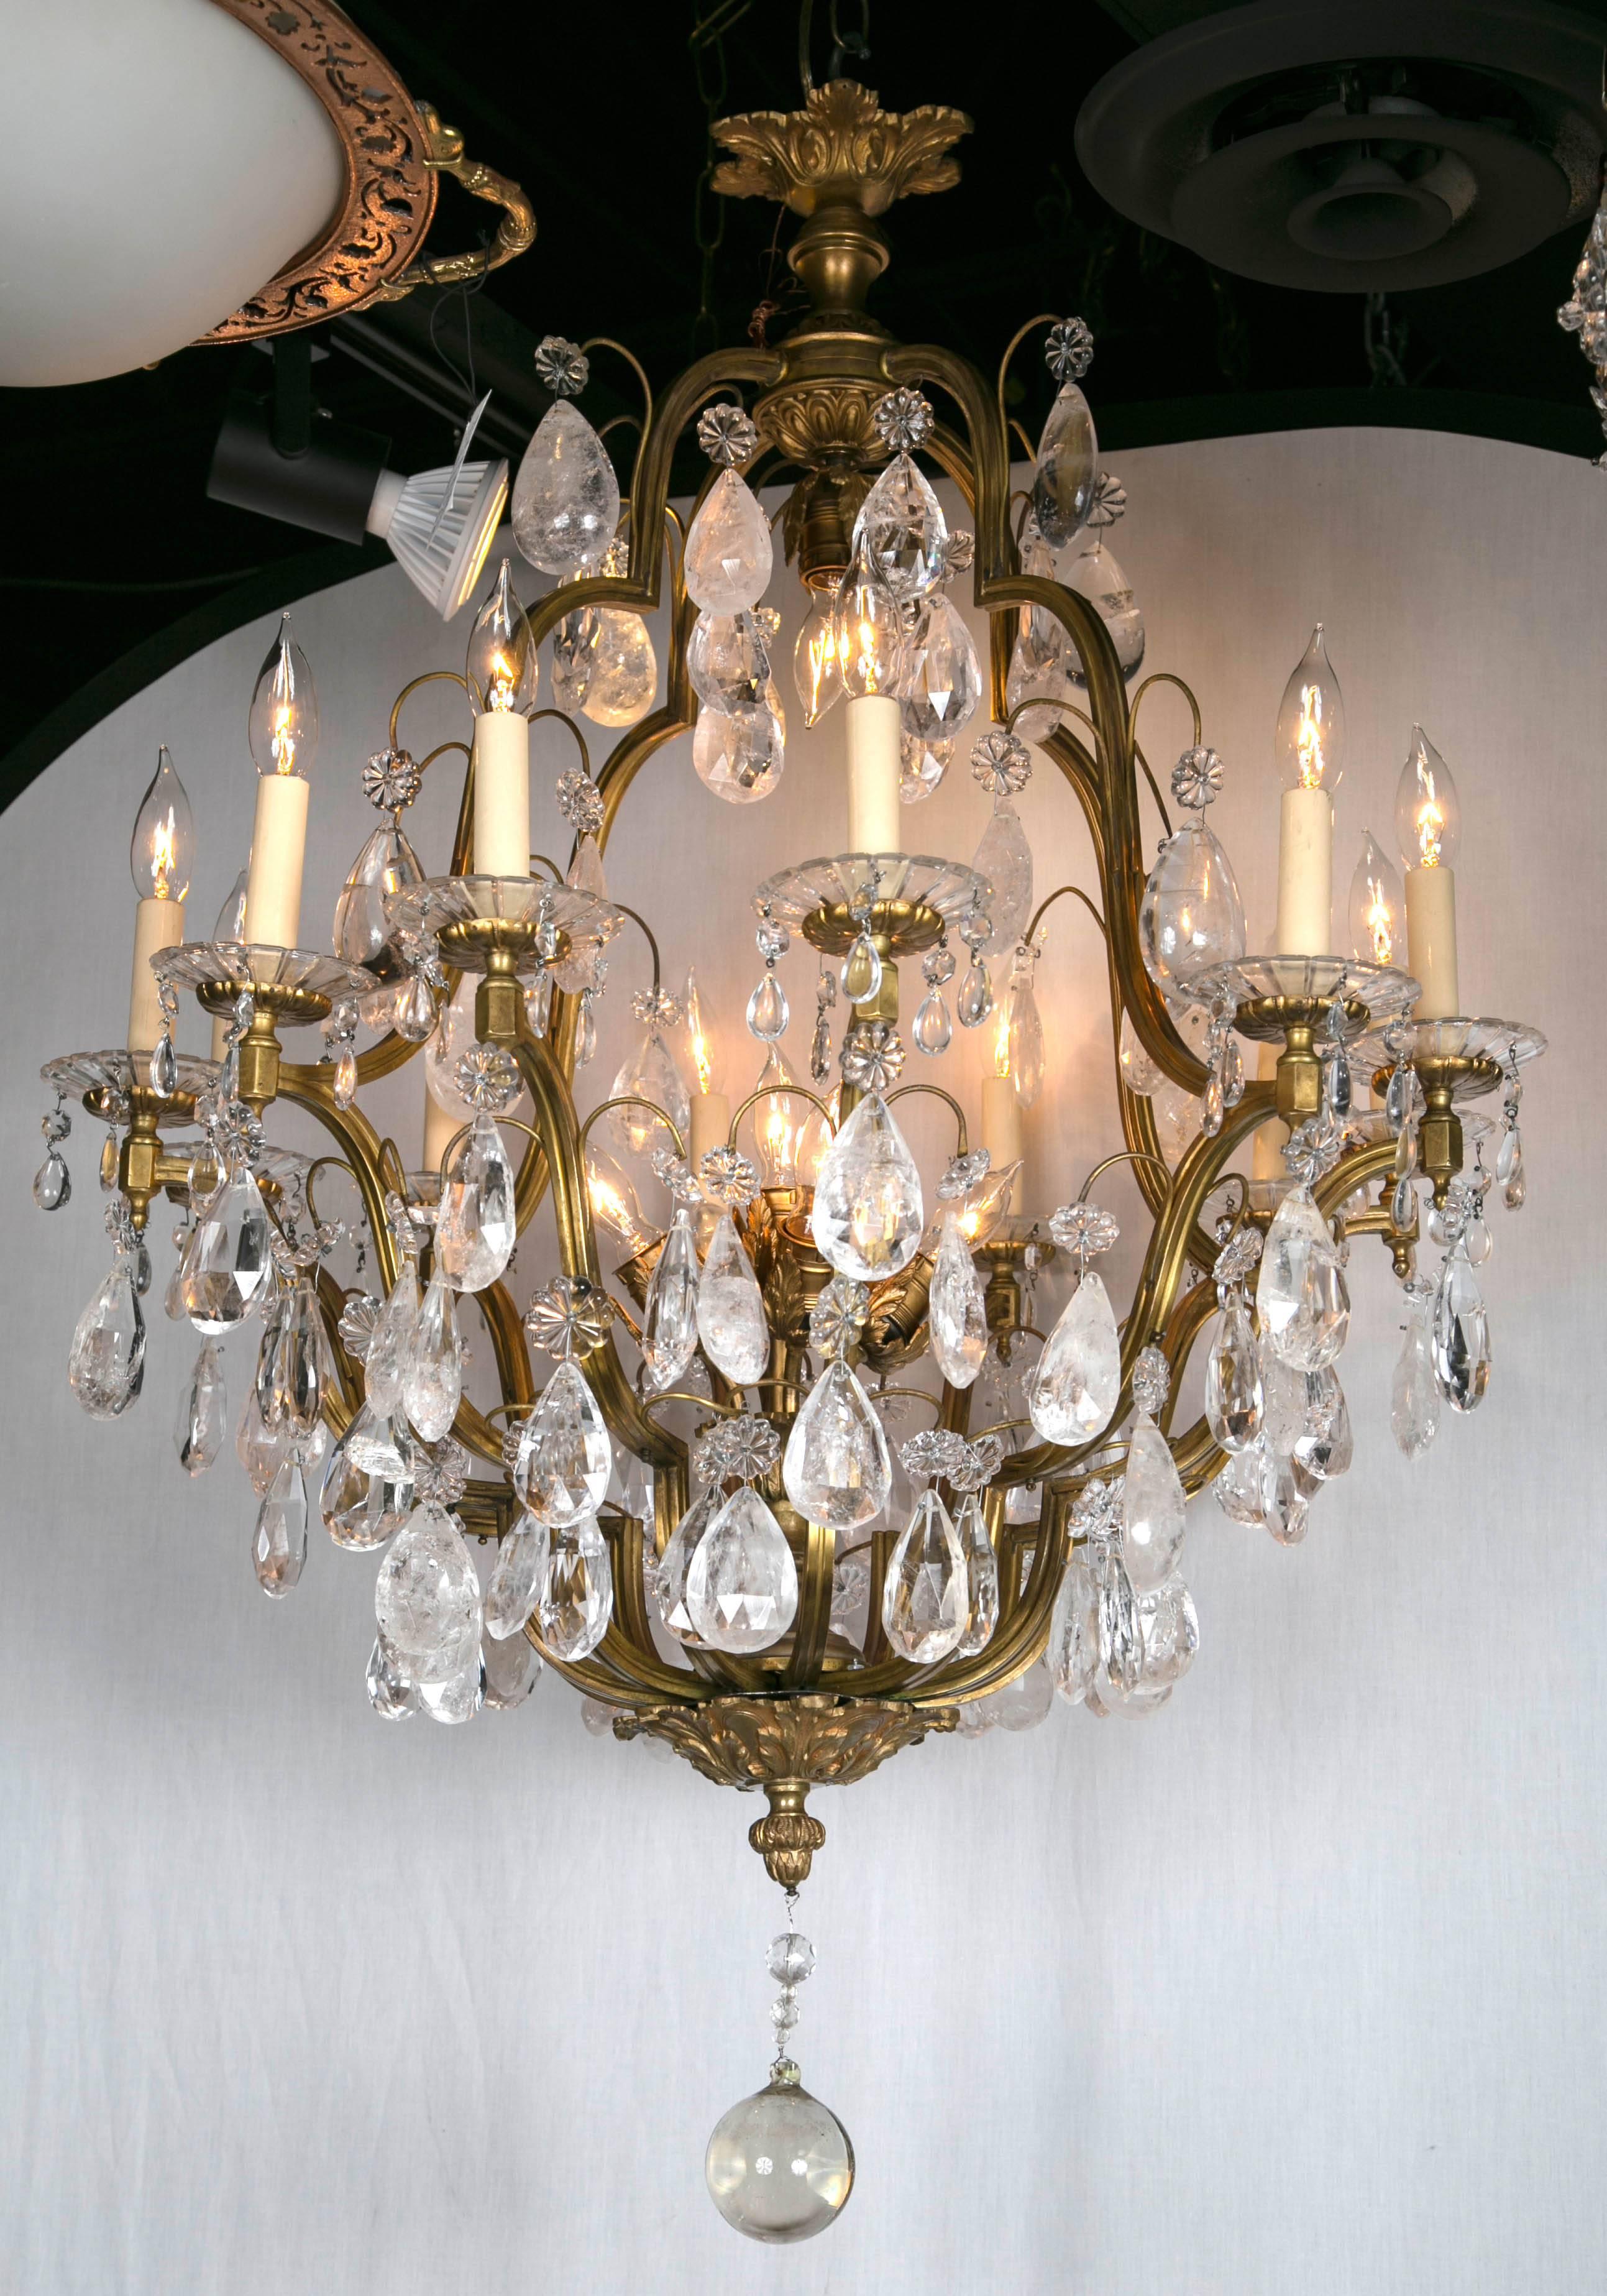 Beautiful French gilt bronze eighteen-light chandeliers with rock crystal pendants,
late 19th century, priced per piece.